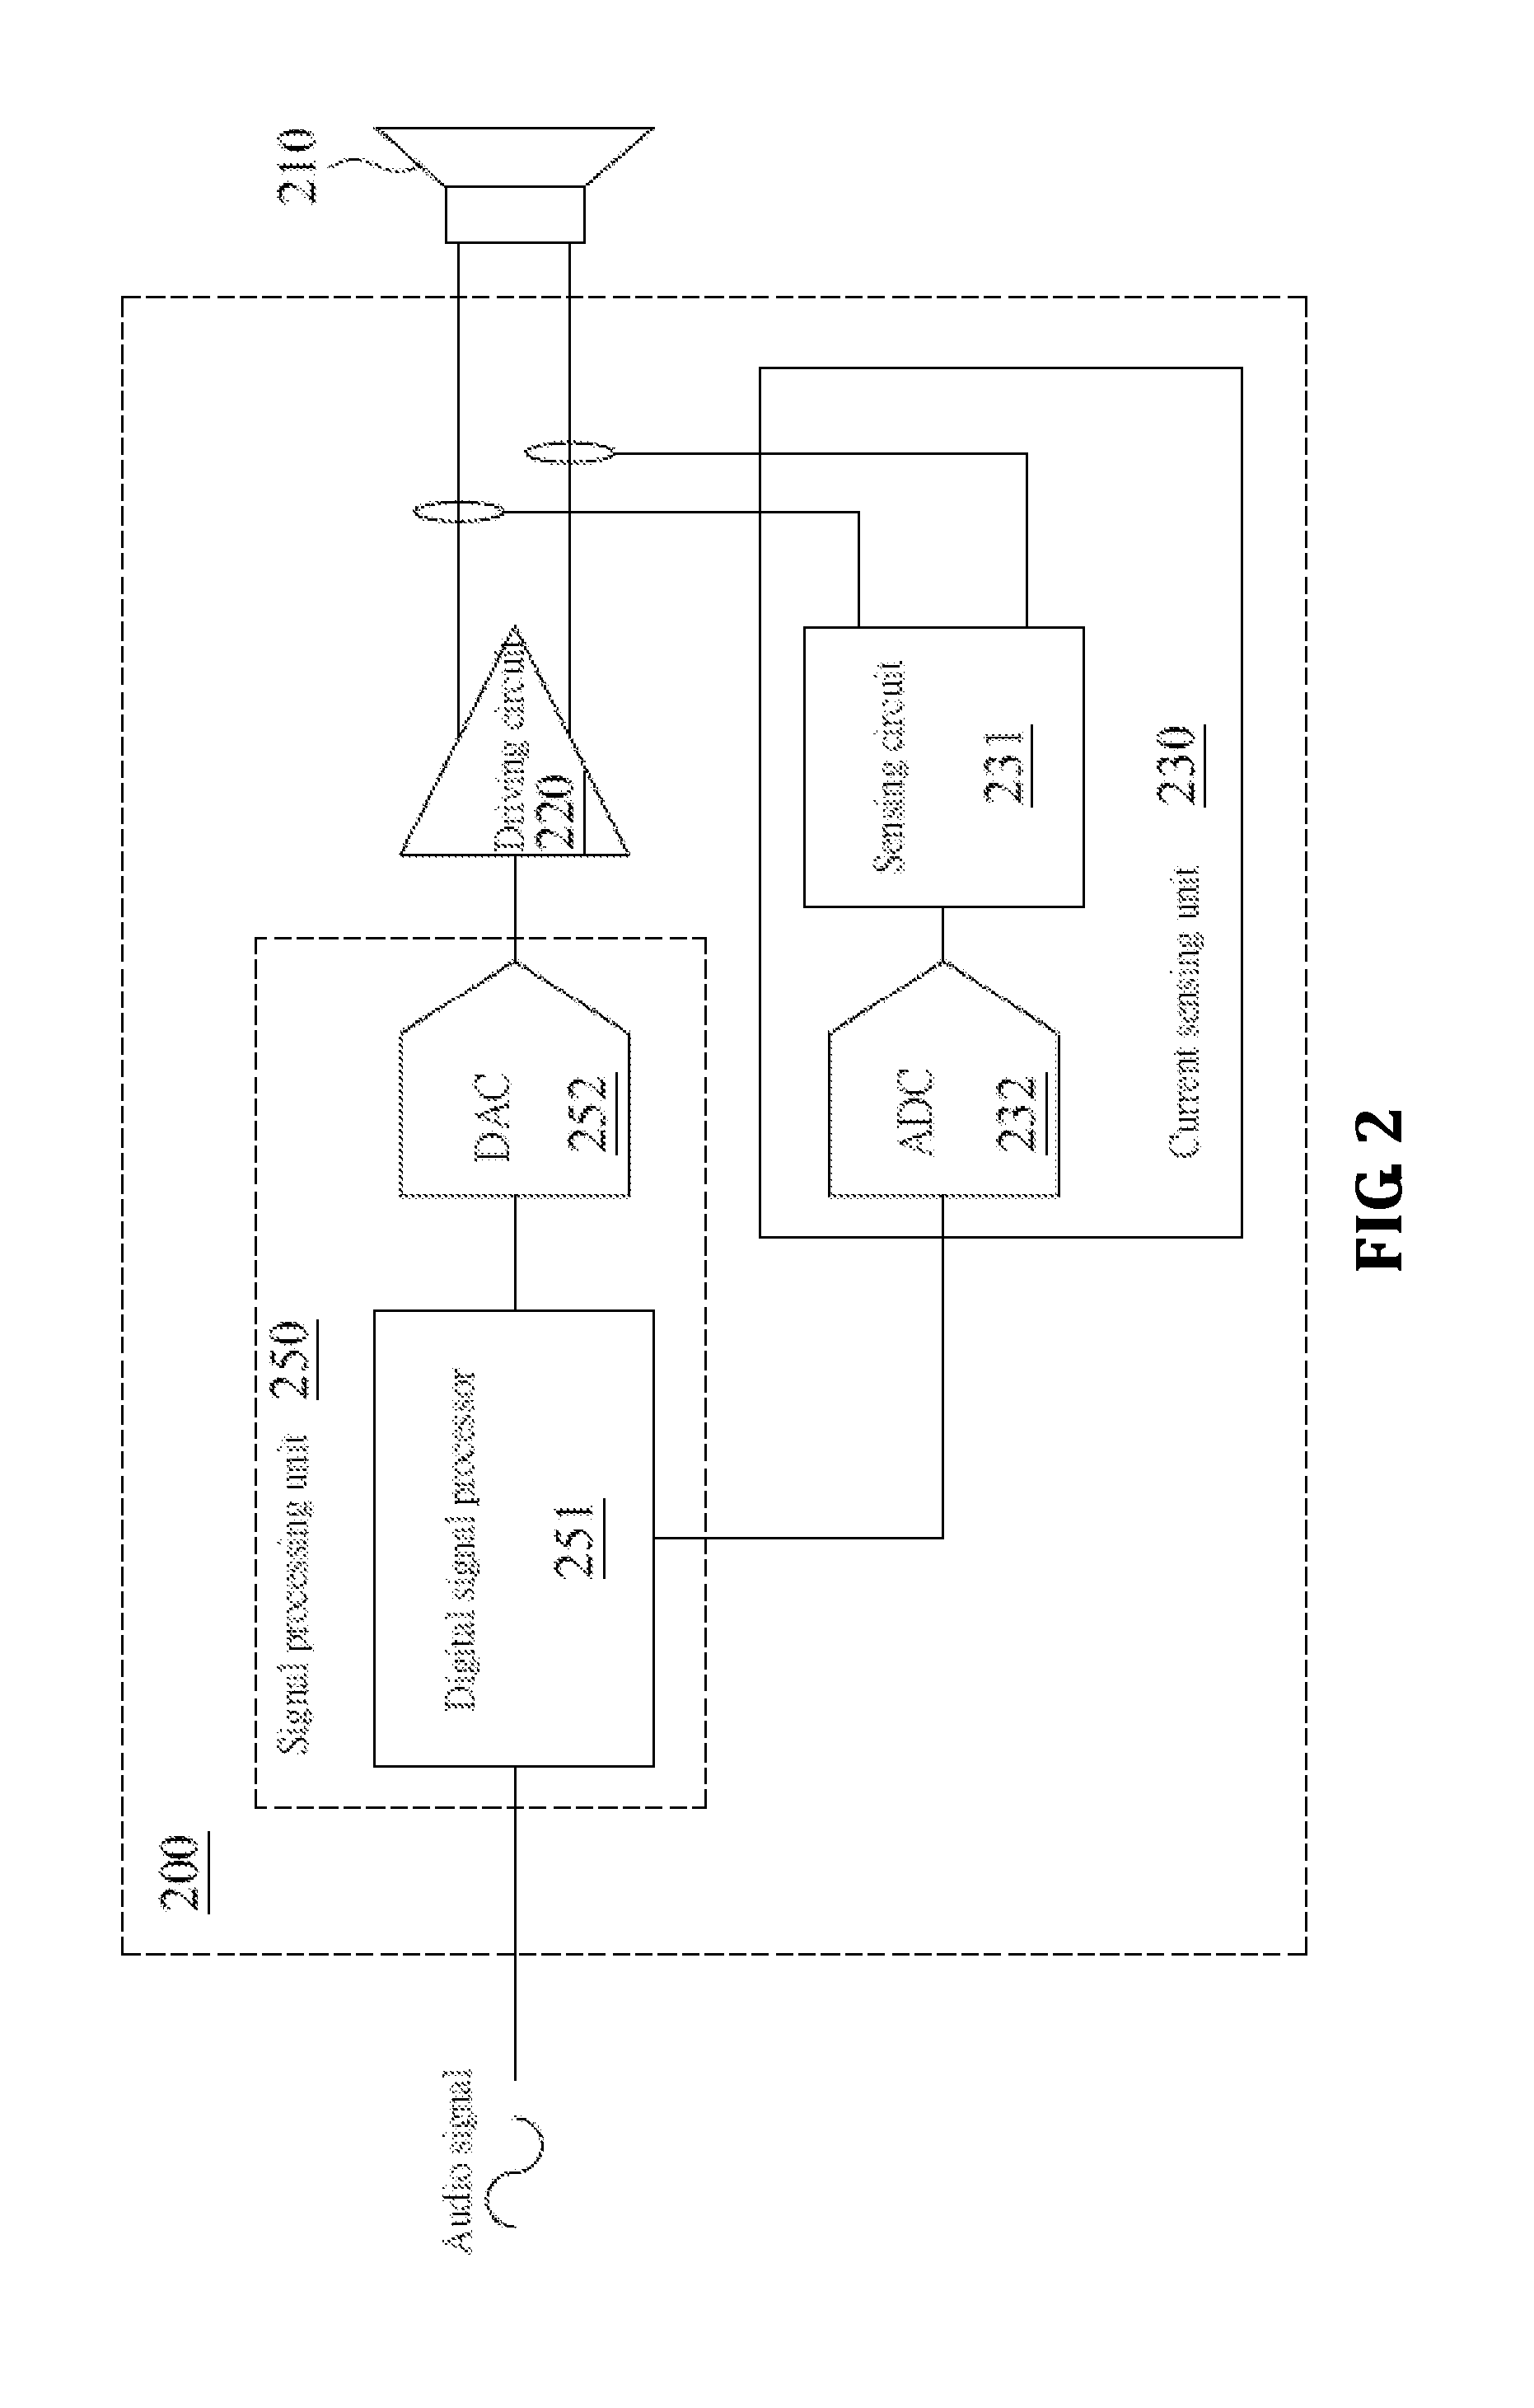 Device and method for detecting force factor of loudspeaker